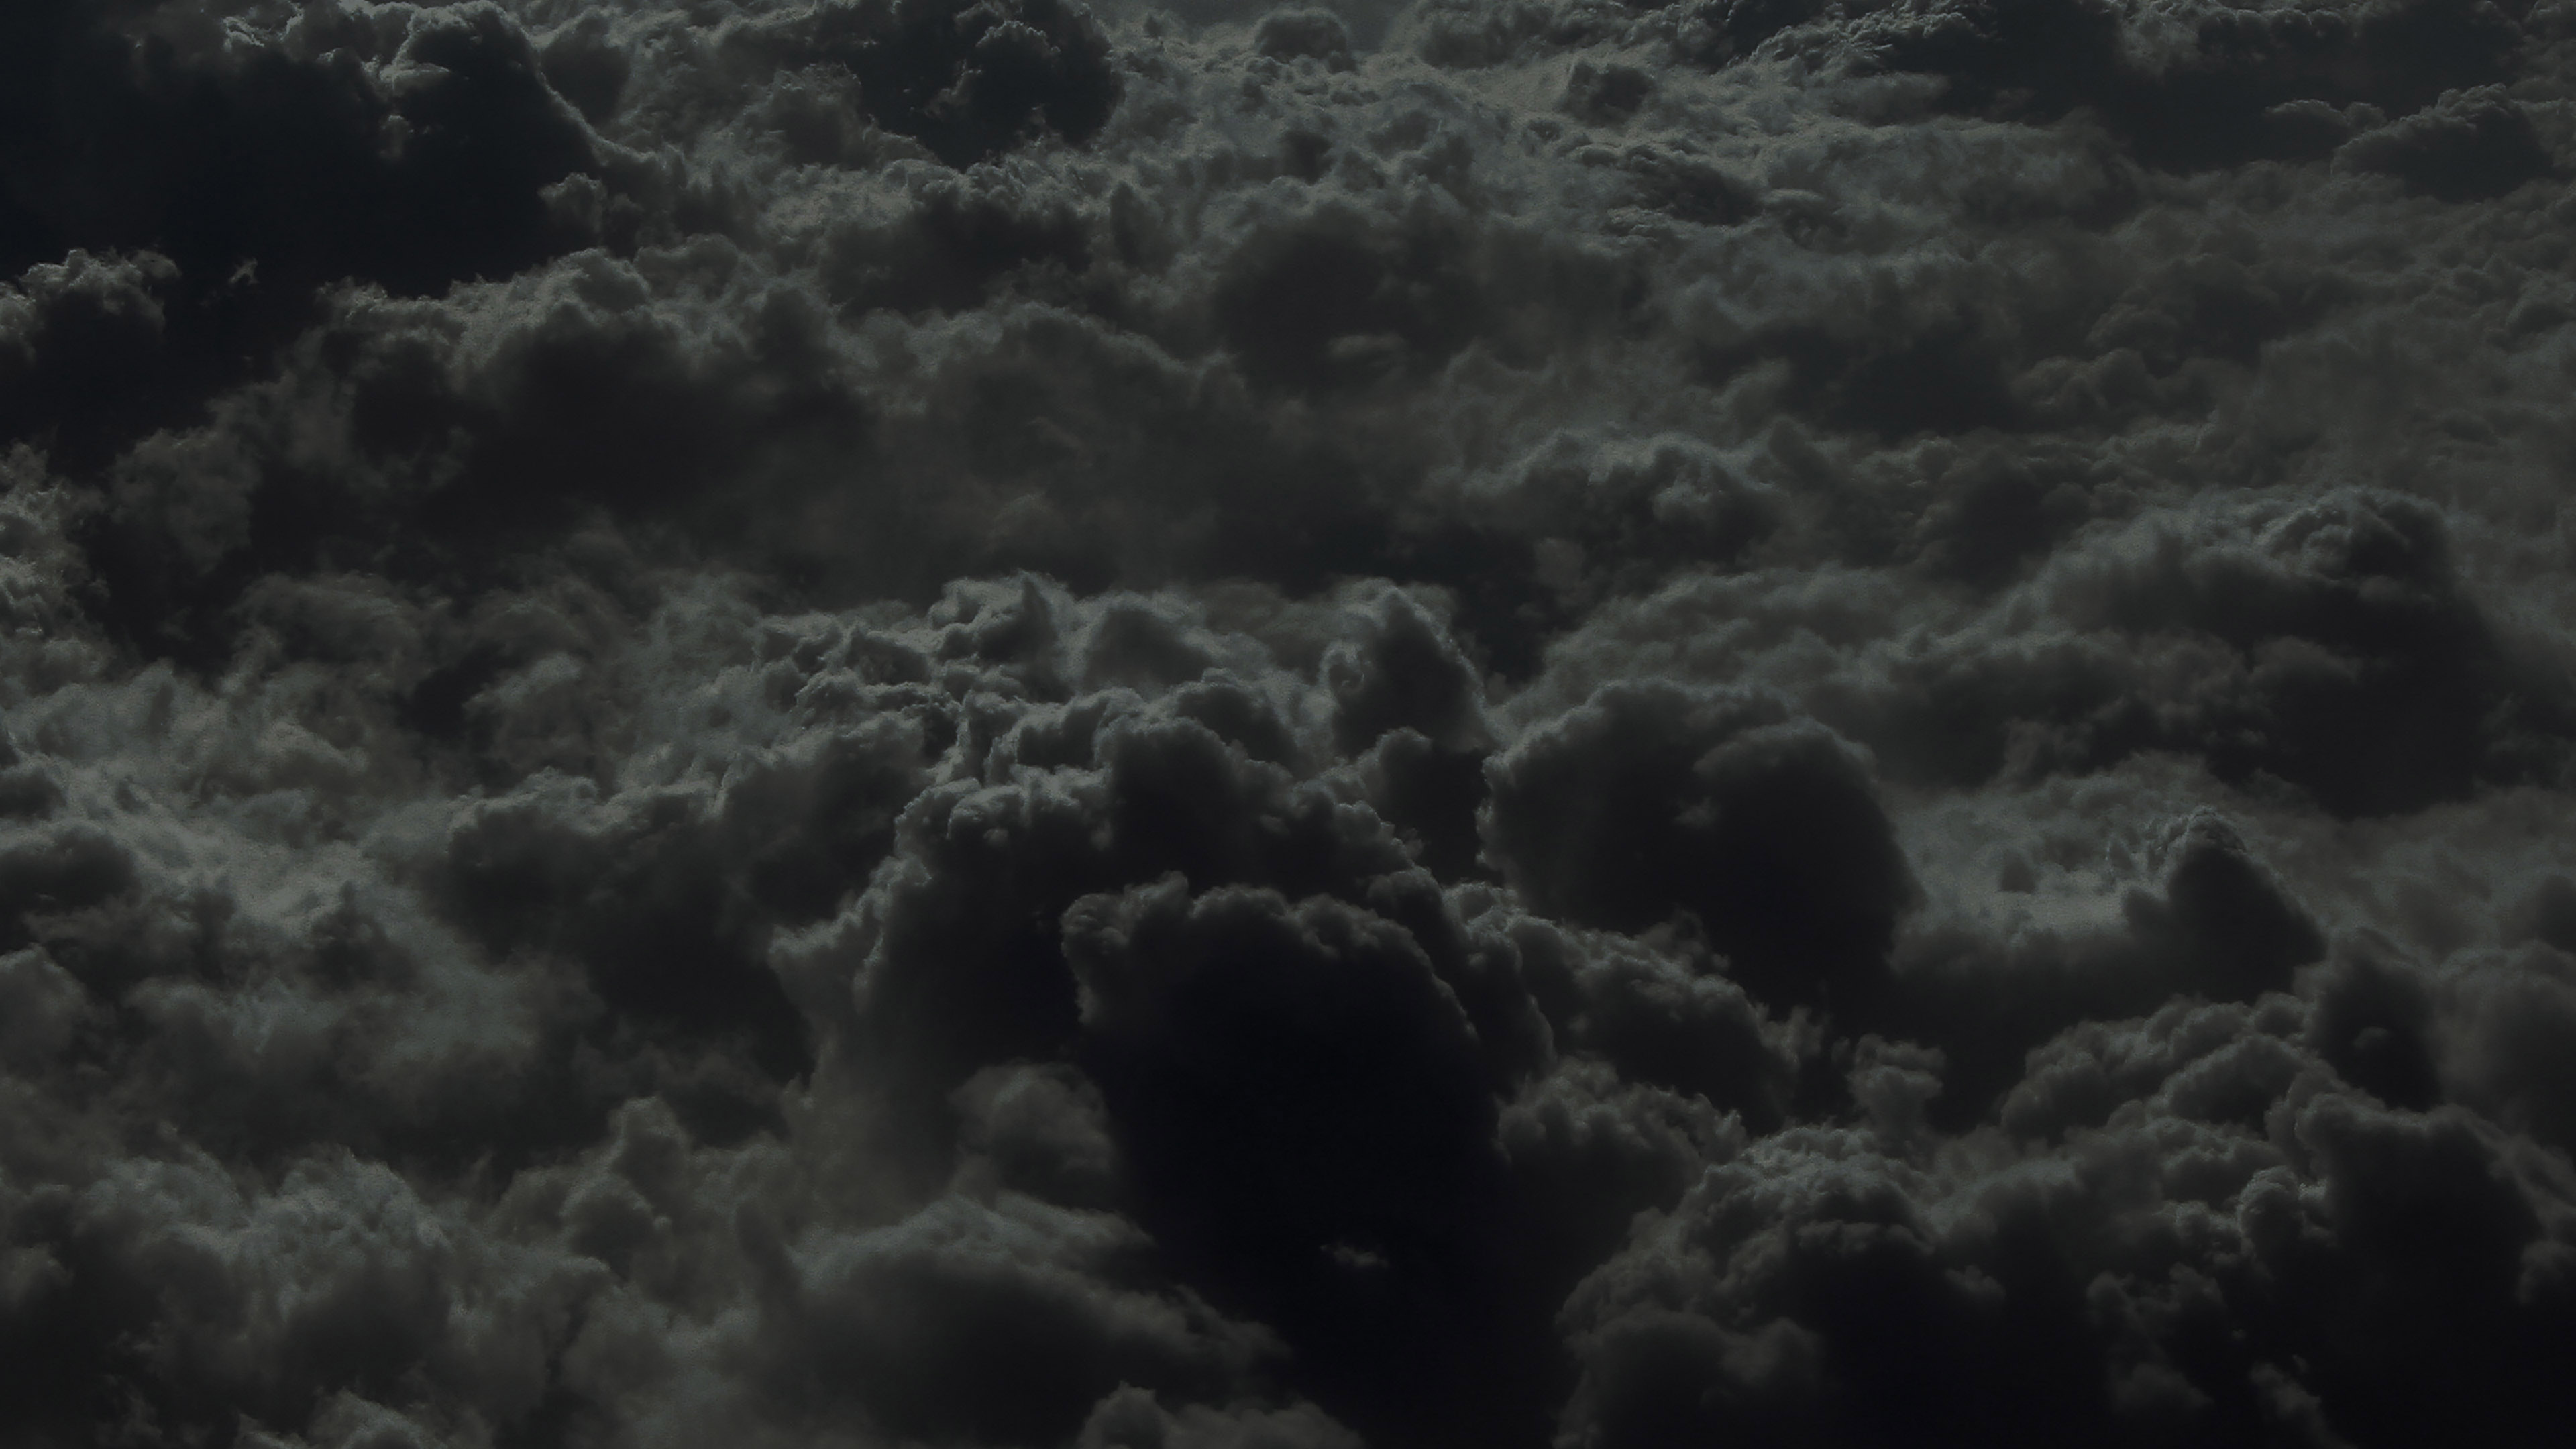 Gray Cloudy Sky: Clouds blocking sunlight, Atmospheric layer, Darkness. 3840x2160 4K Background.